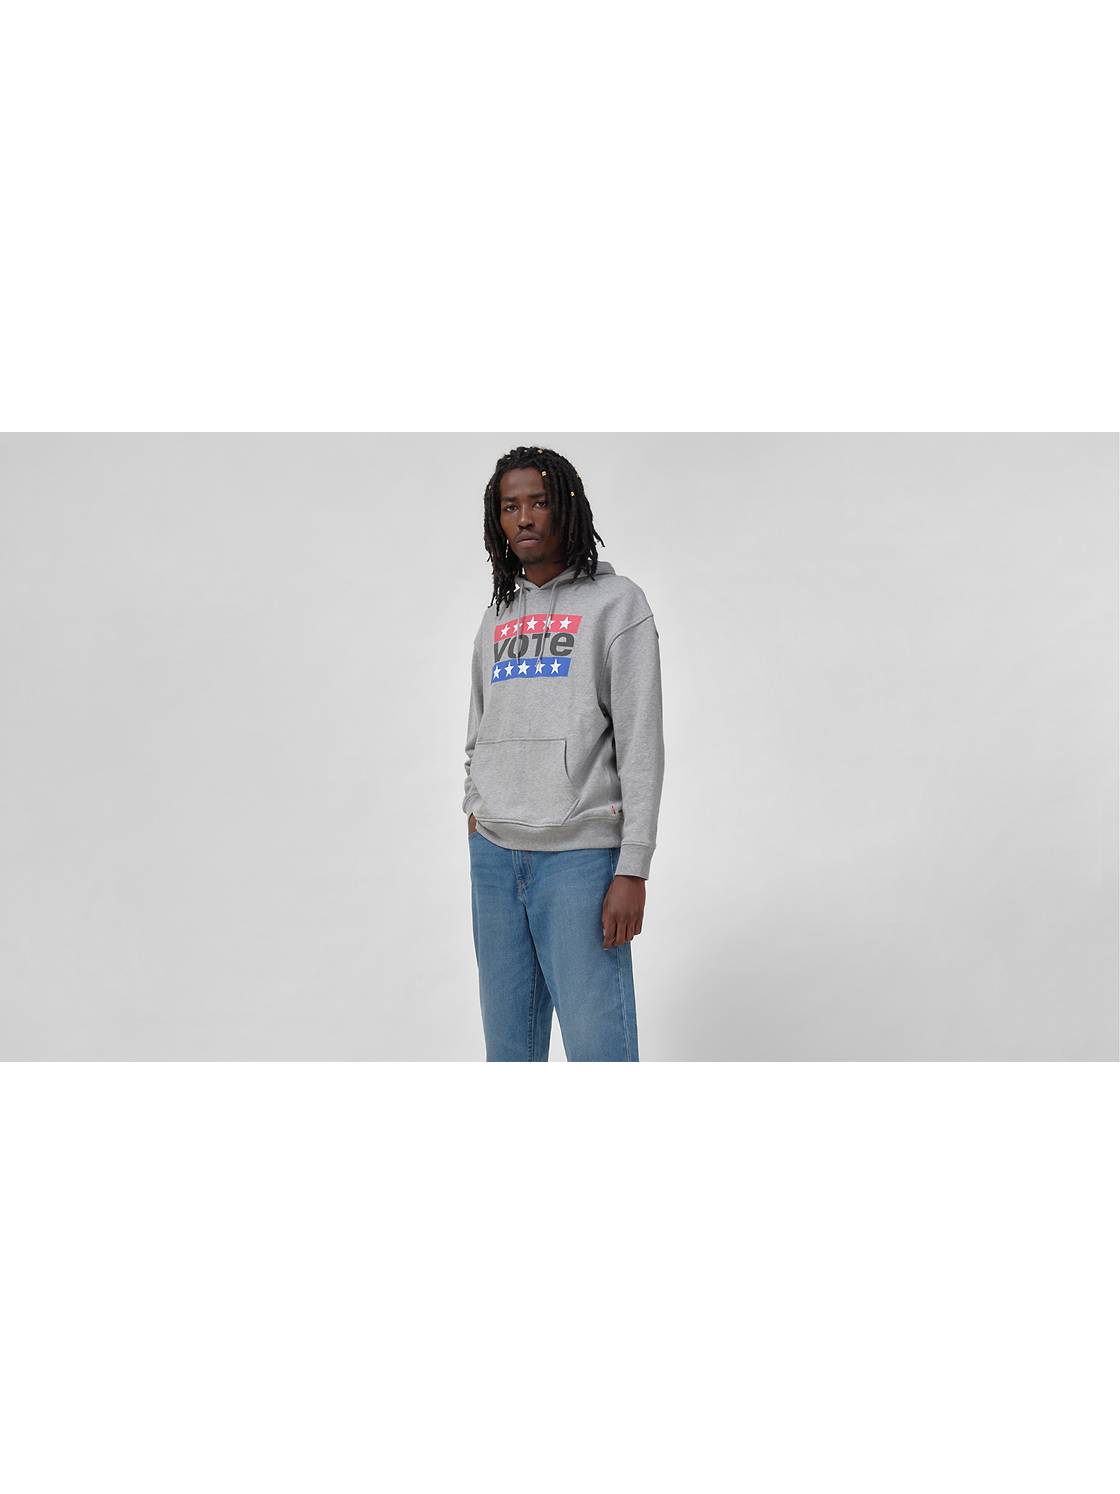 Levi's® x Vote Relaxed Pullover 1